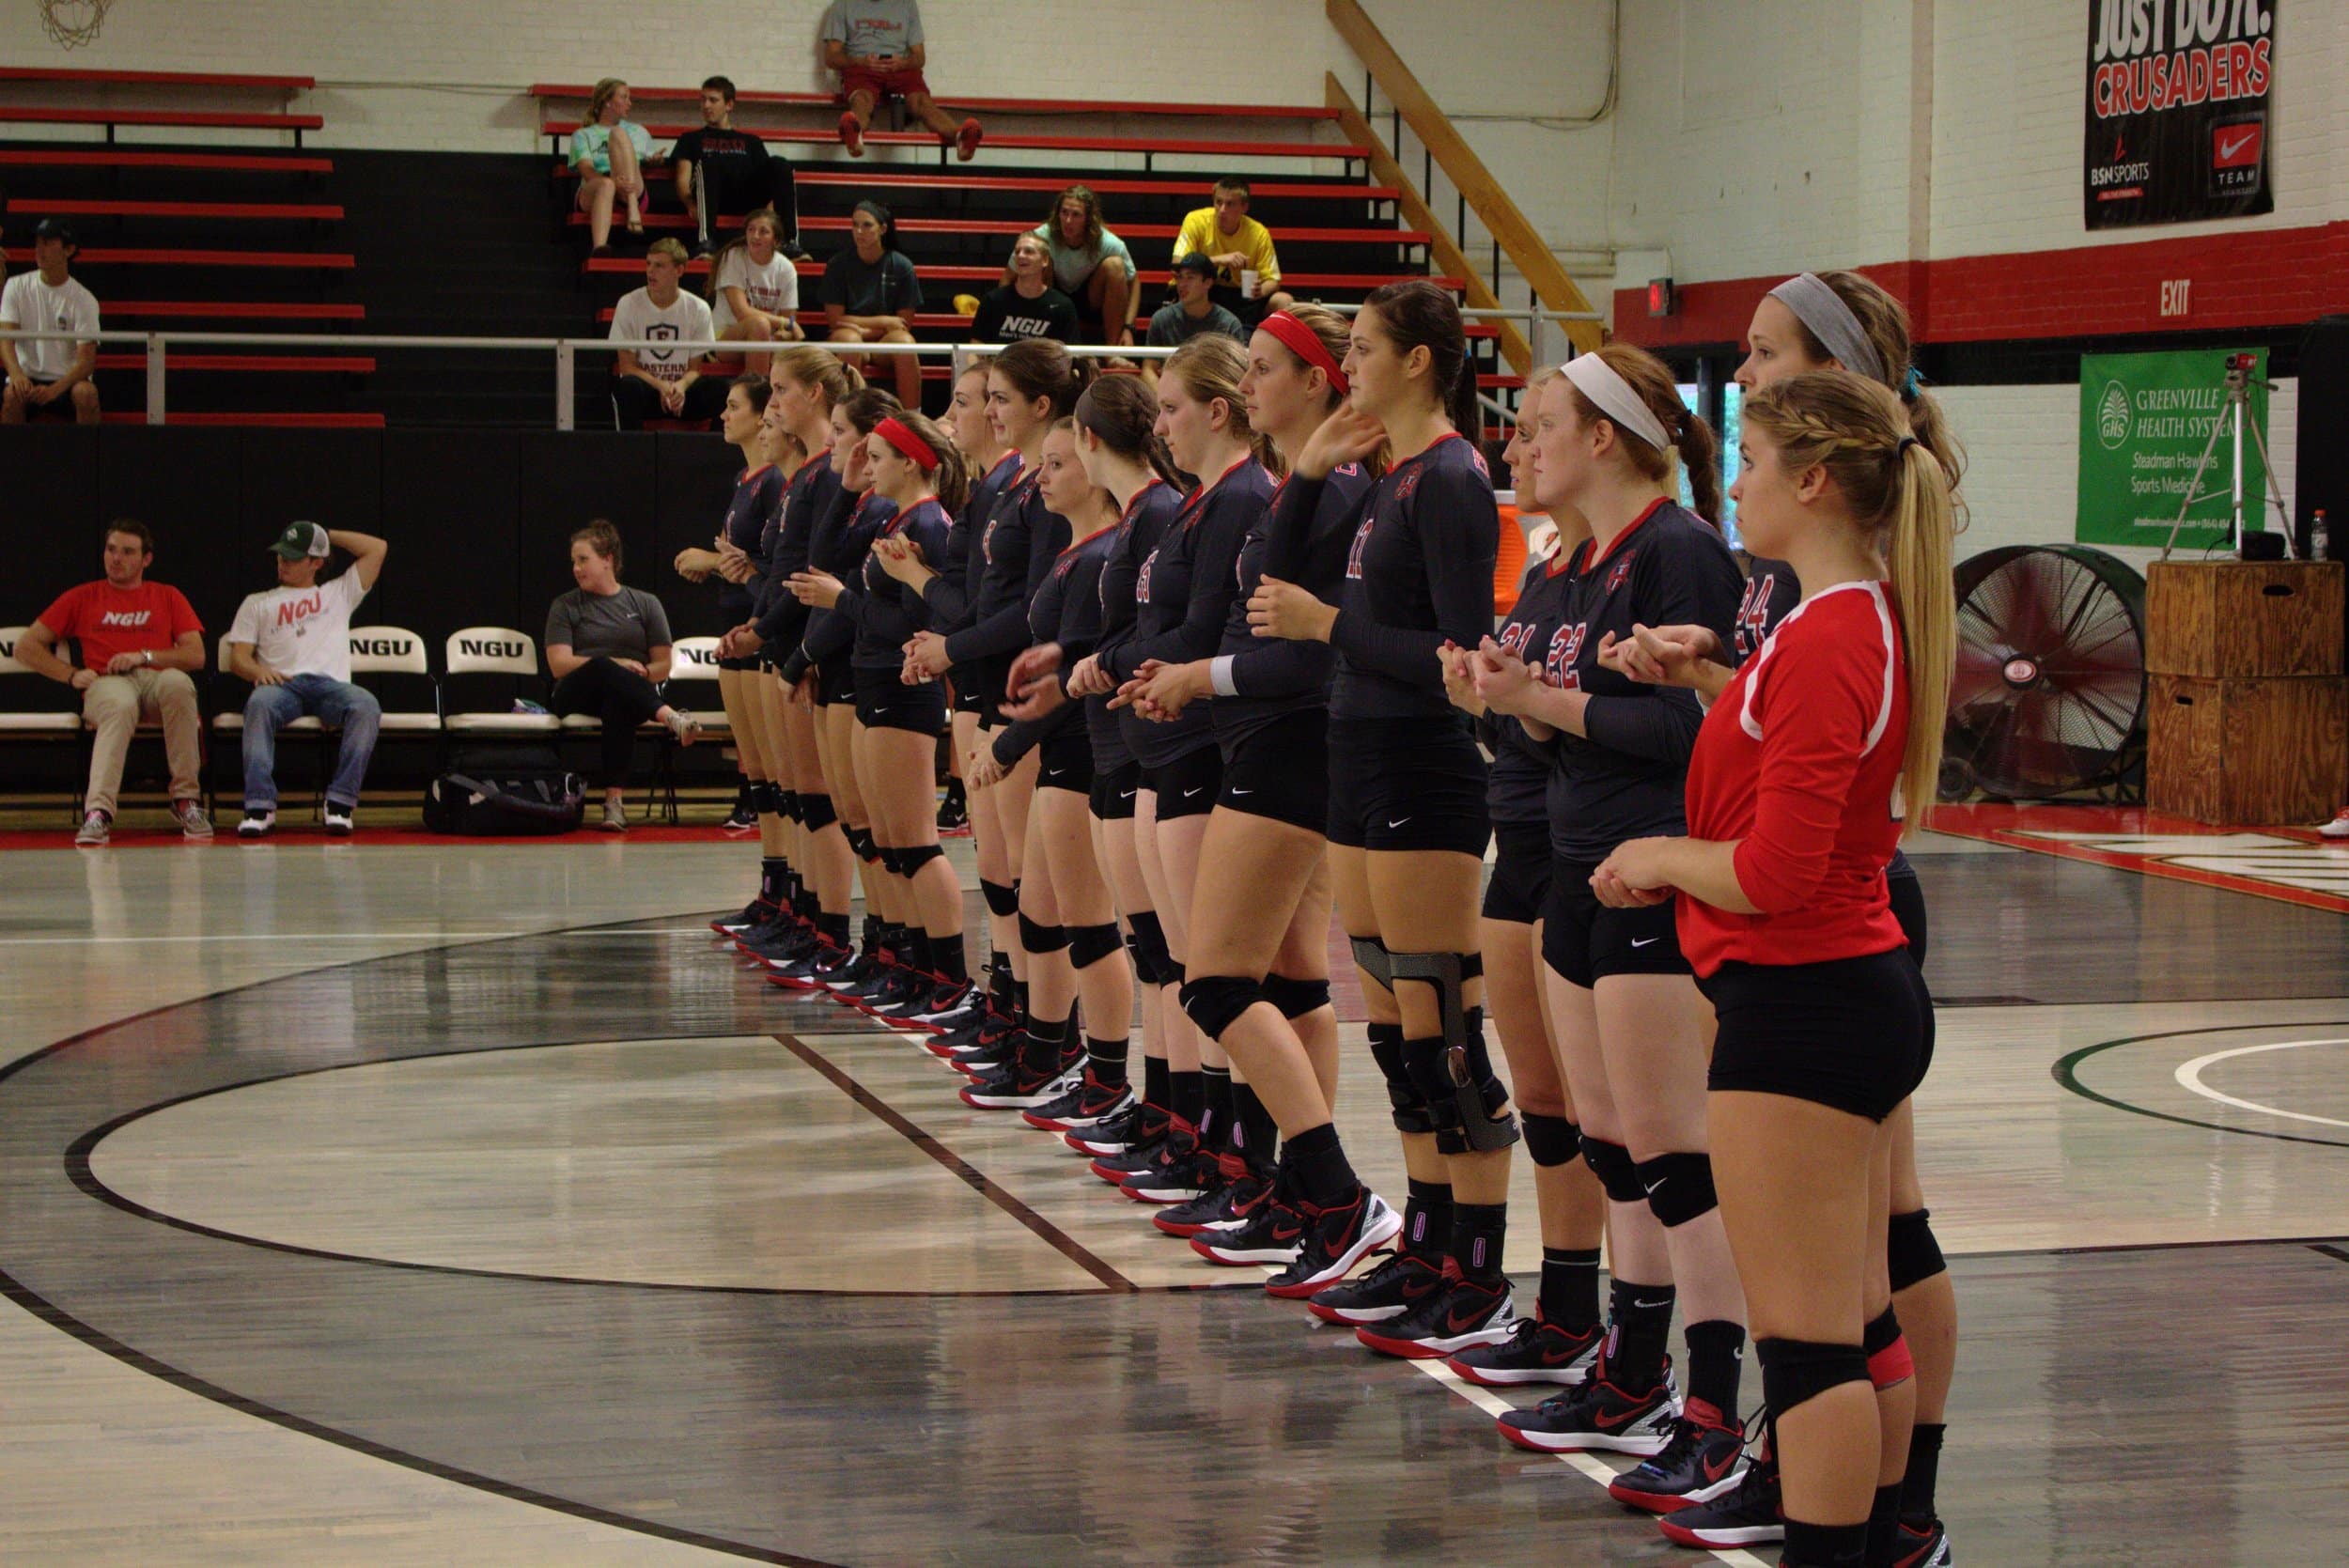  The Lady Crusaders line up to begin the match.&nbsp; 